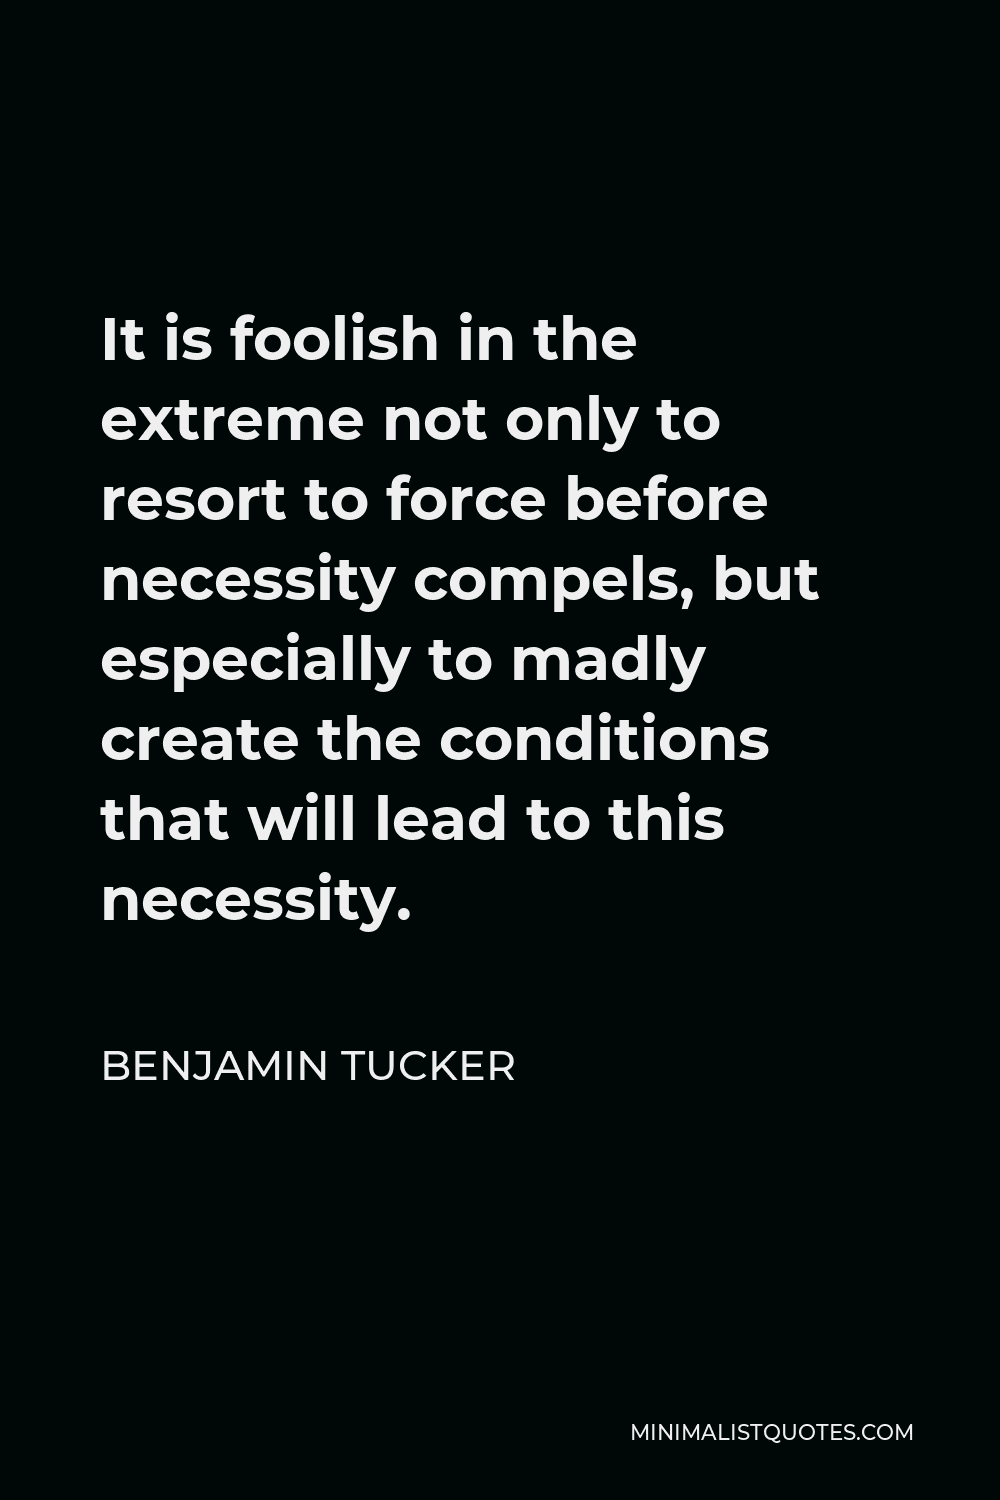 Benjamin Tucker Quote - It is foolish in the extreme not only to resort to force before necessity compels, but especially to madly create the conditions that will lead to this necessity.